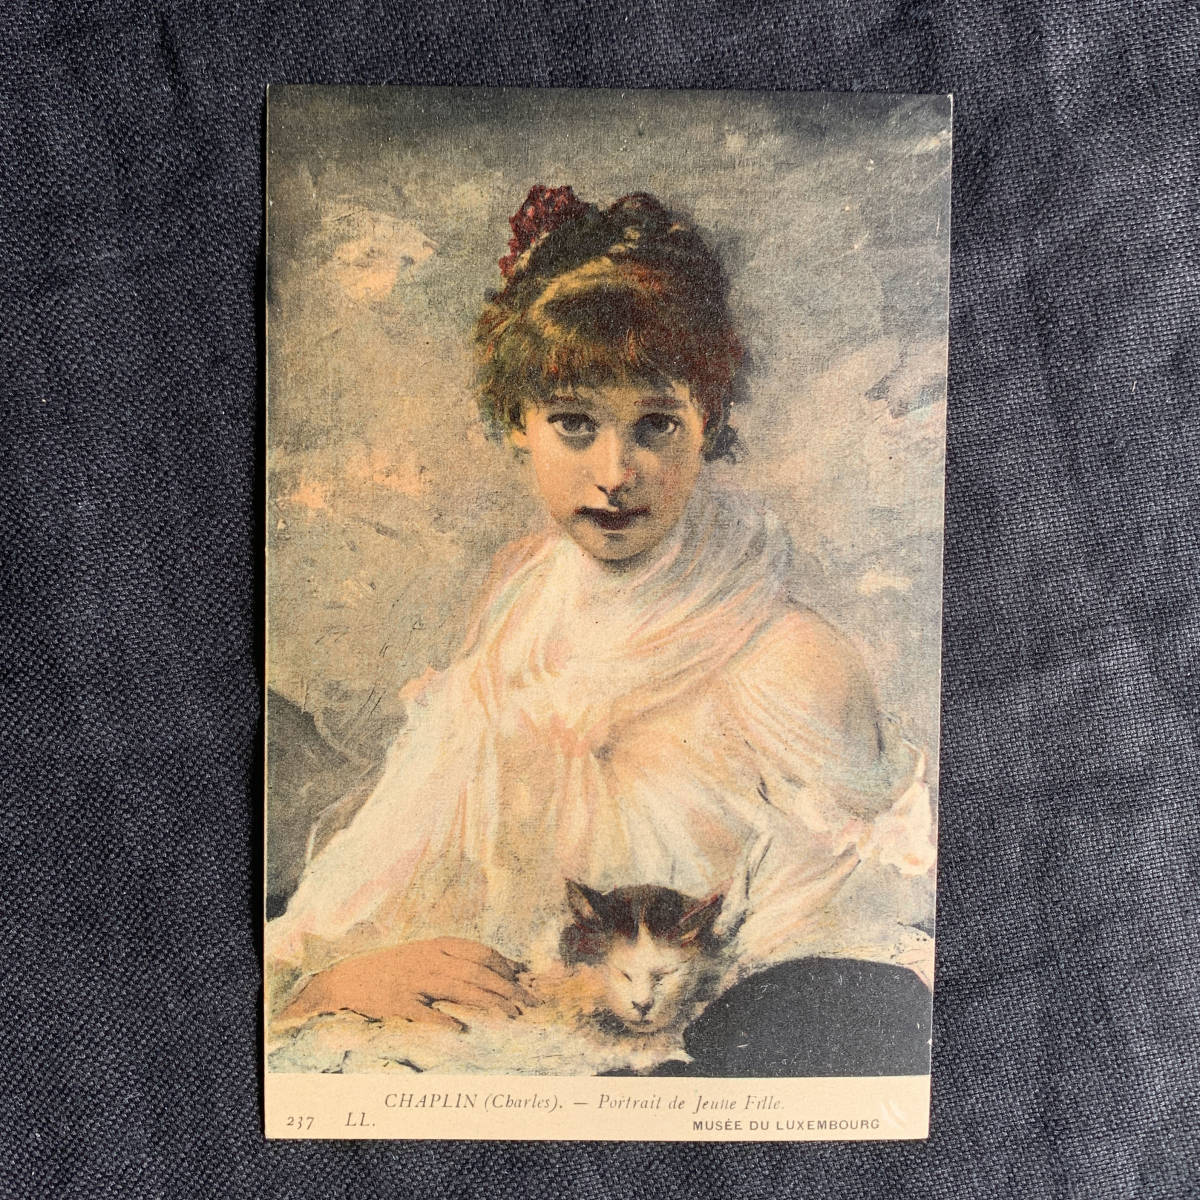 France 1900-20s Cat and Young Girl Carles Chaplin Artist Painting Oil Painting Sleeping Cat Postcard Fine Art Antique Antique, antique, collection, miscellaneous goods, others